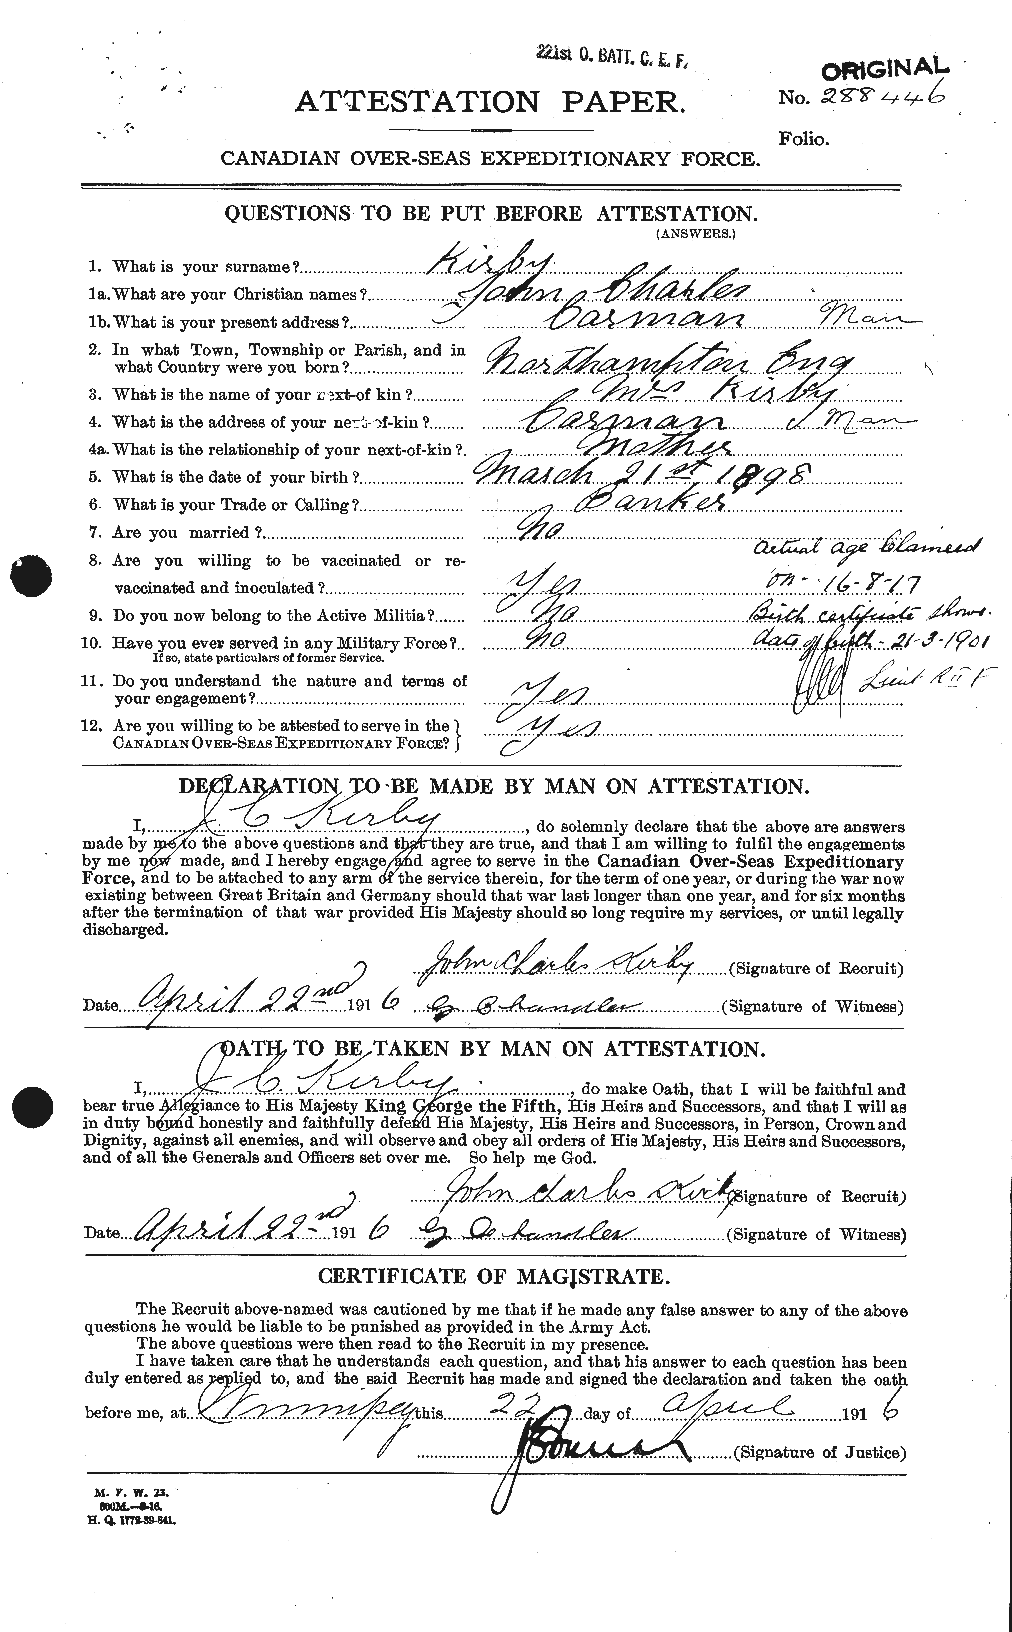 Personnel Records of the First World War - CEF 437228a